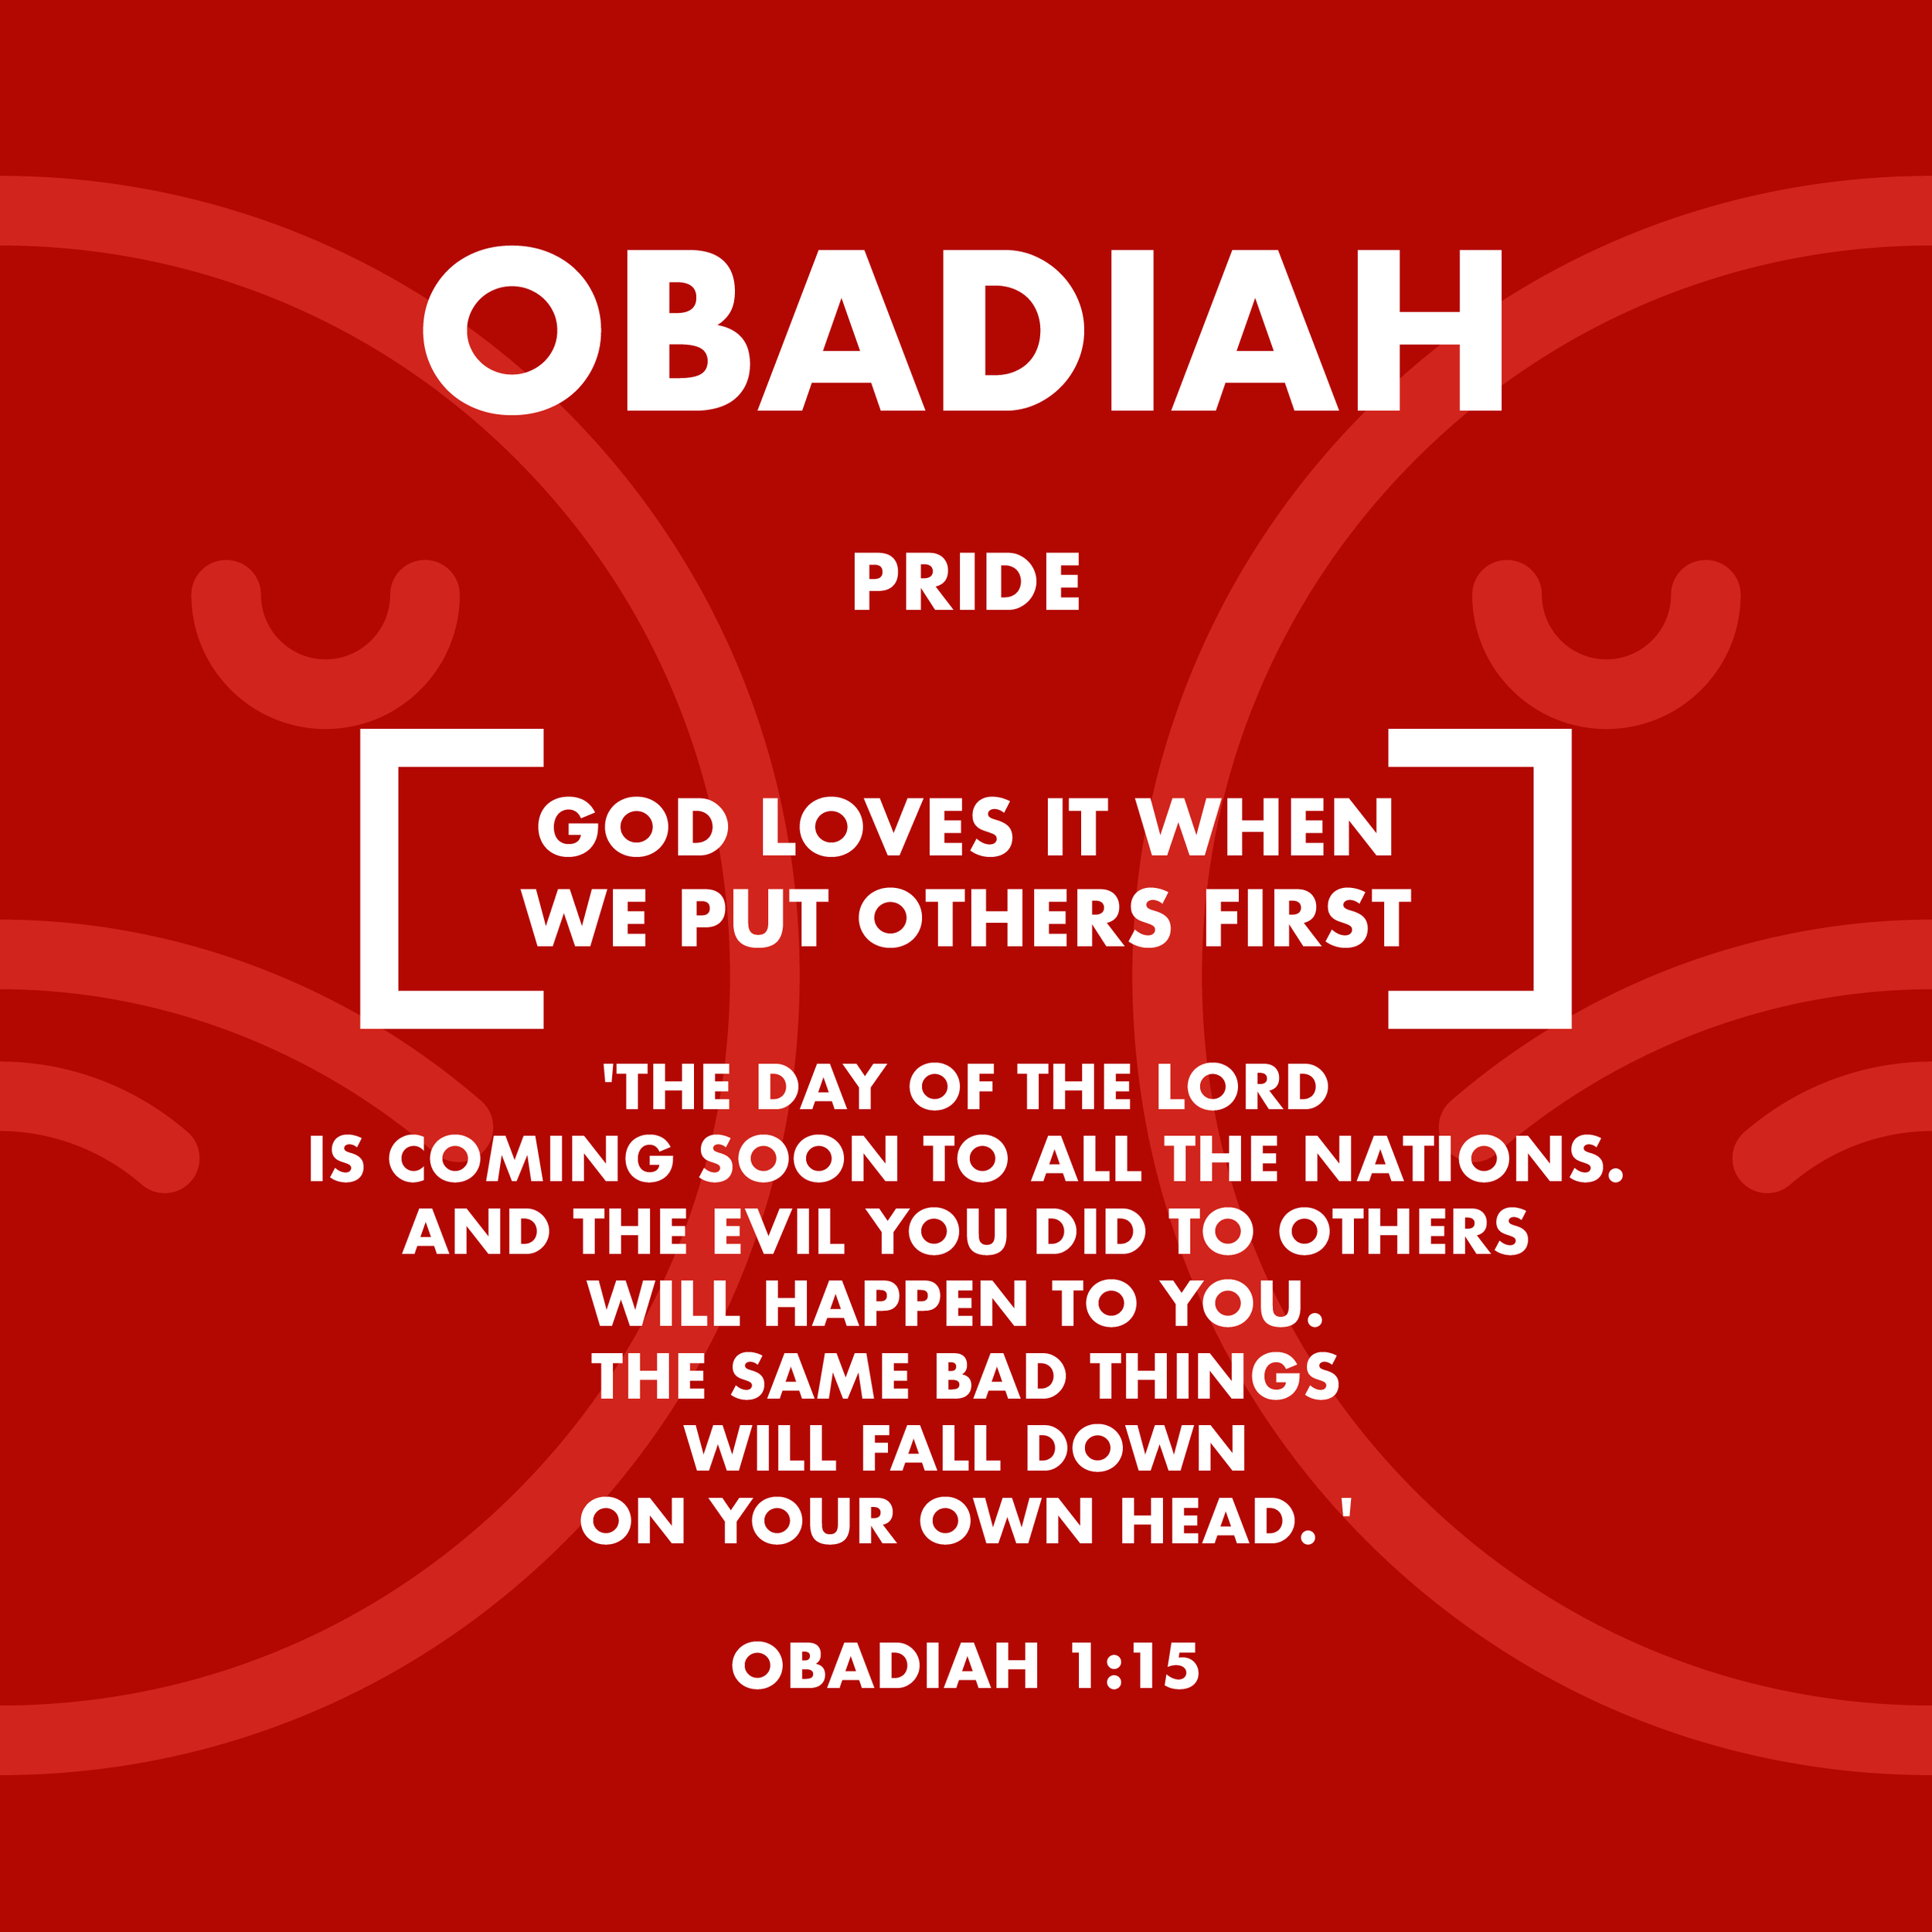 Books of the Bible_posters_29 Obadiah.png